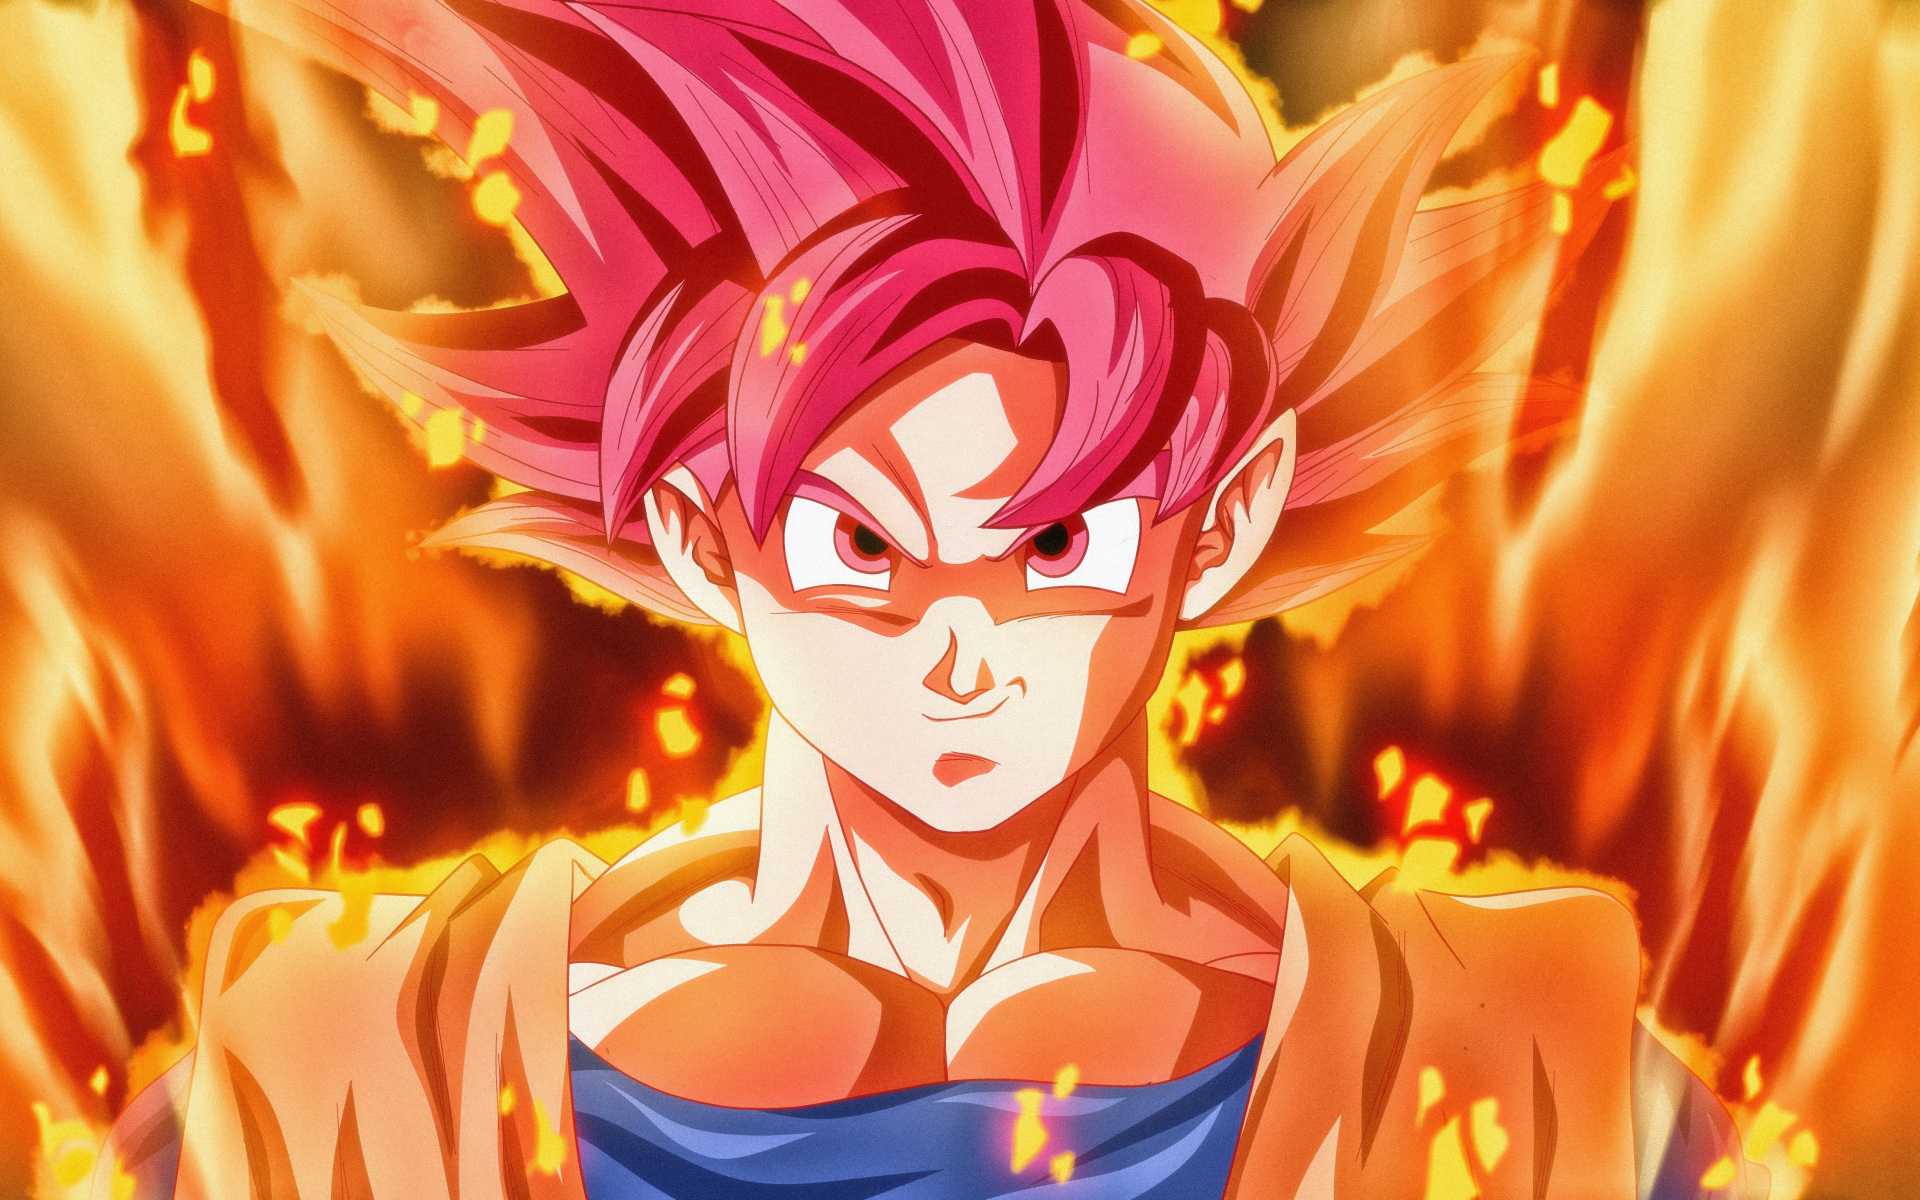 goku pictures as your background for your device like ultra instinct goku &...